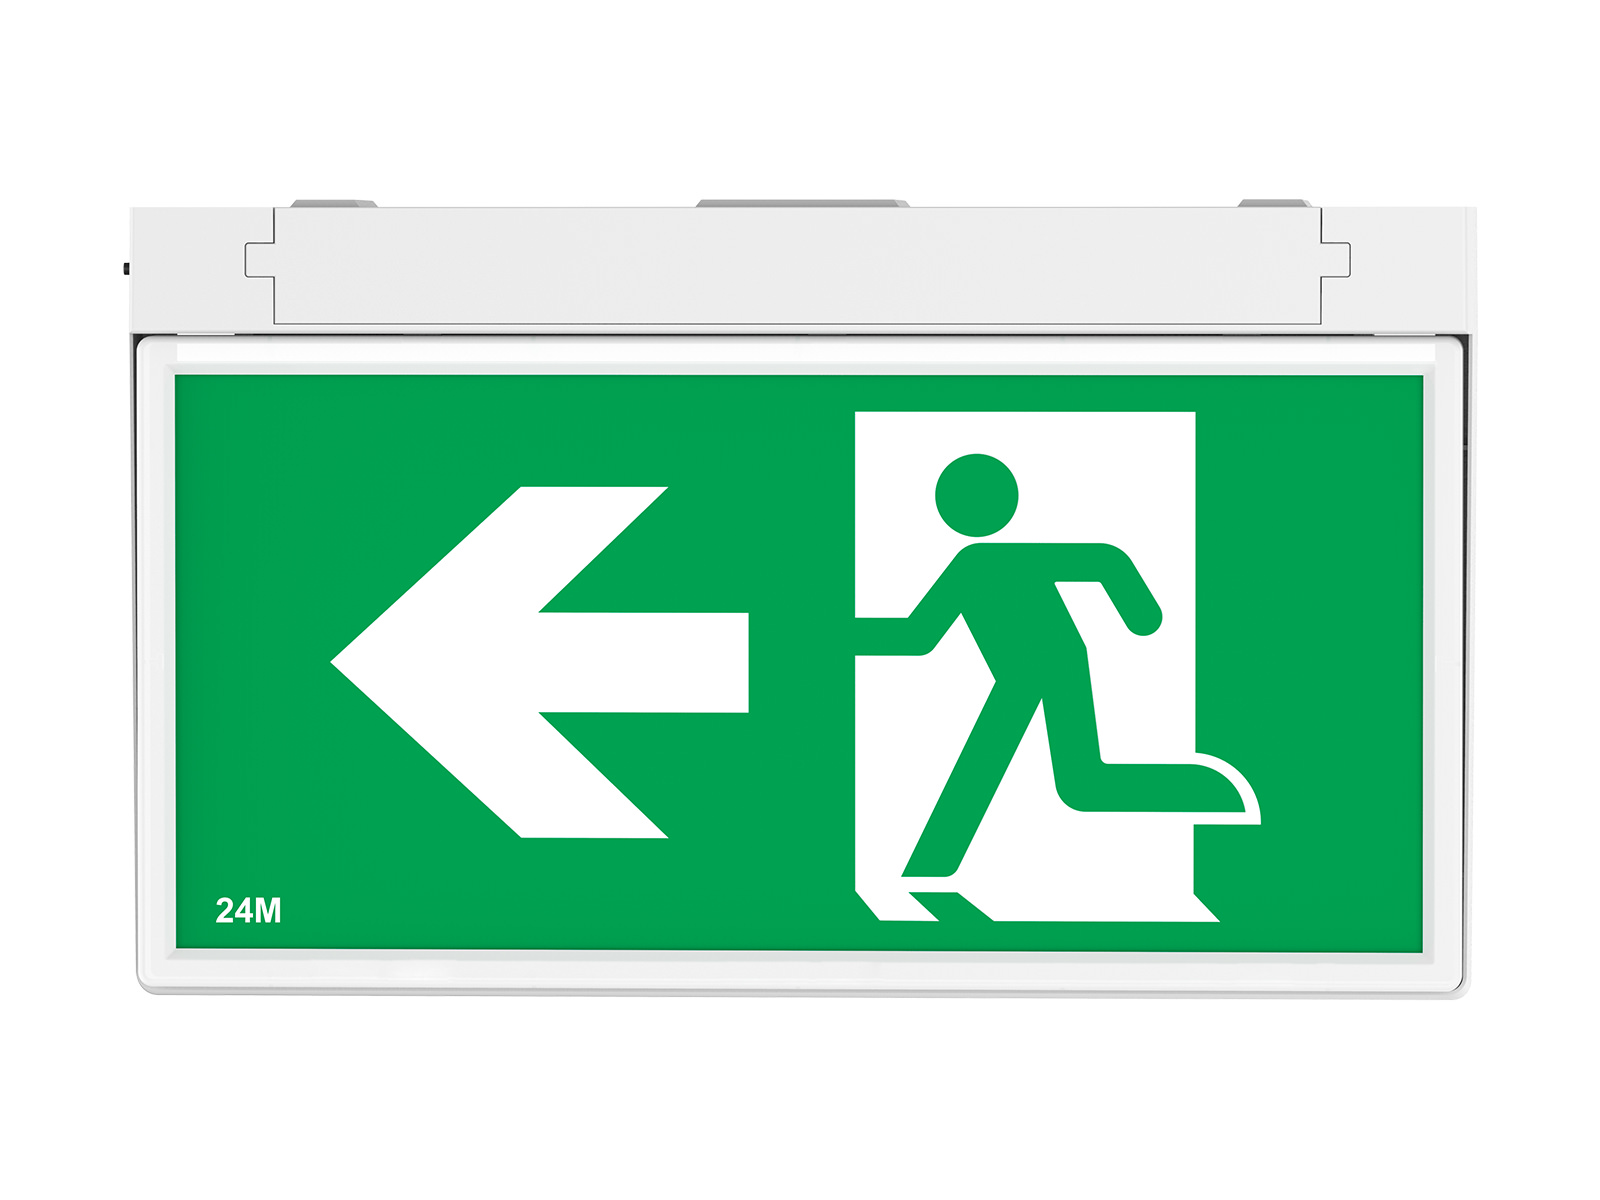 EPA EX1 LED Exit Sign for commercial and industrial applications